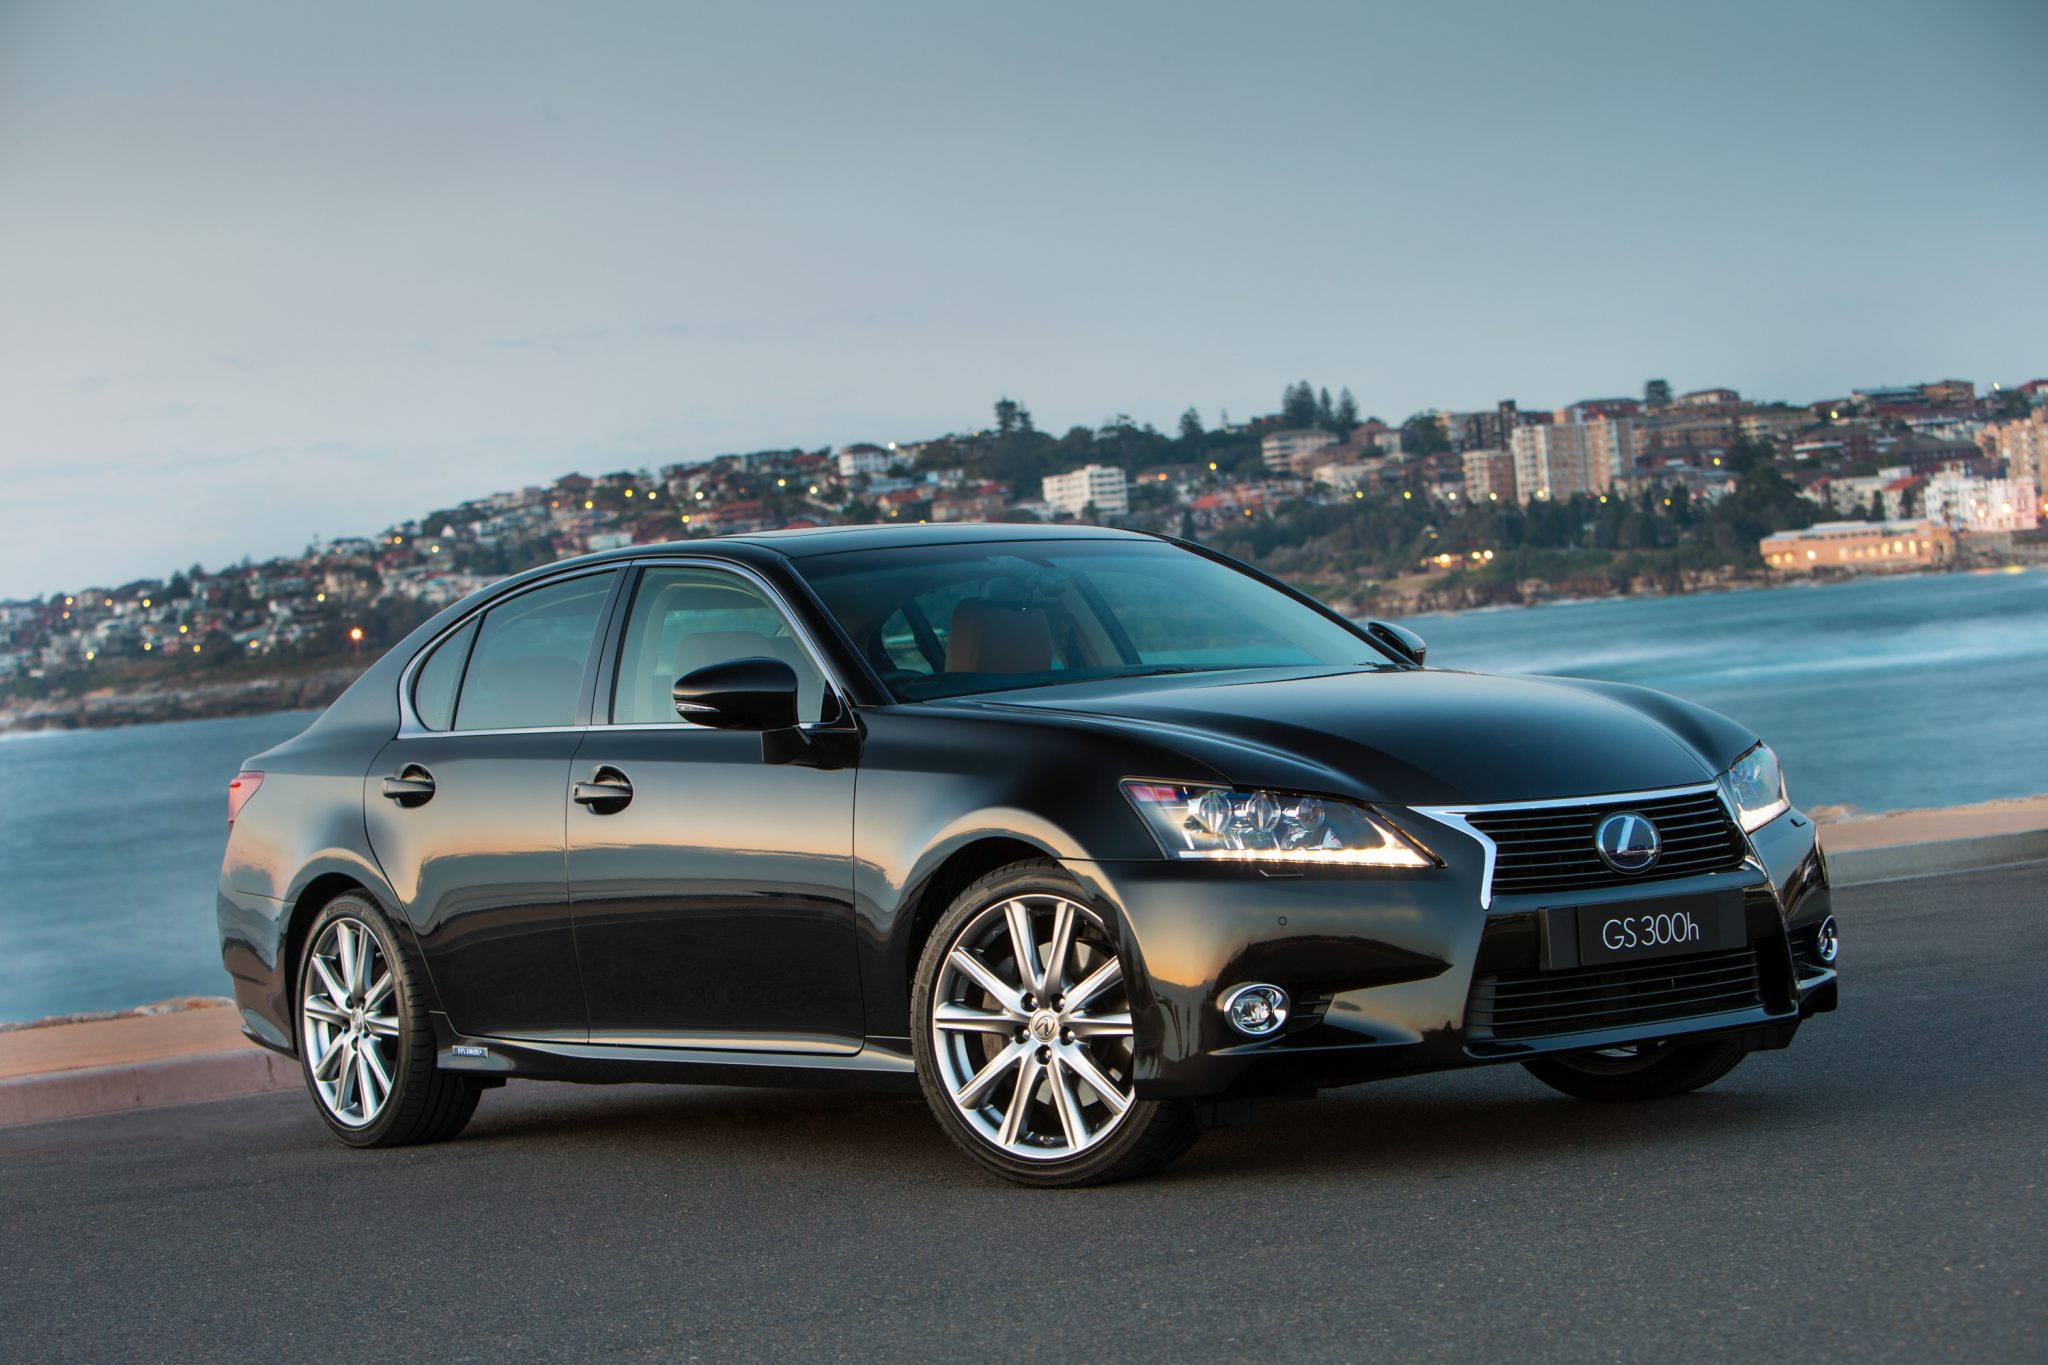 Lexus Cars News GS gets boost in equipment and new GS 300h